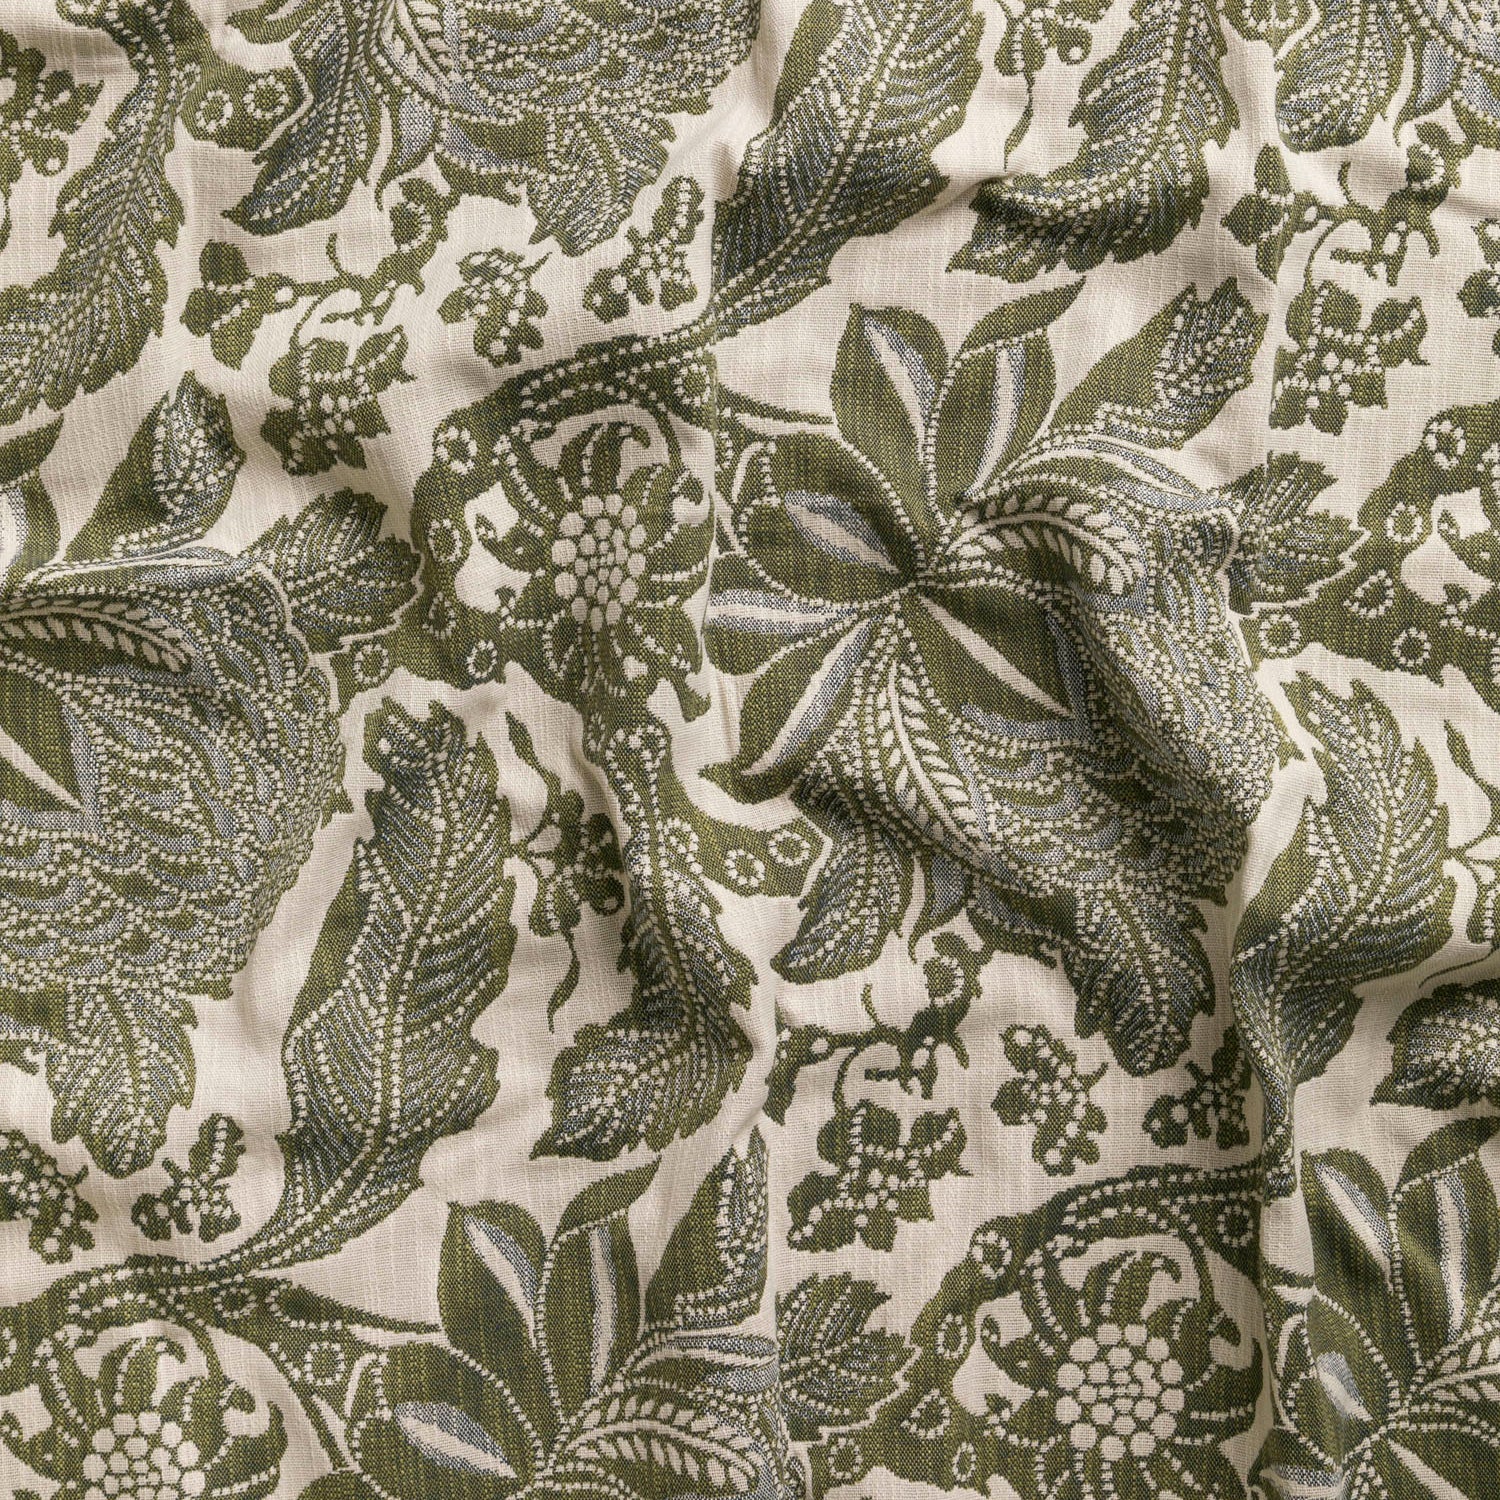 Detail of wallpaper in a repeating botanical print in sage and gray on a cream field.